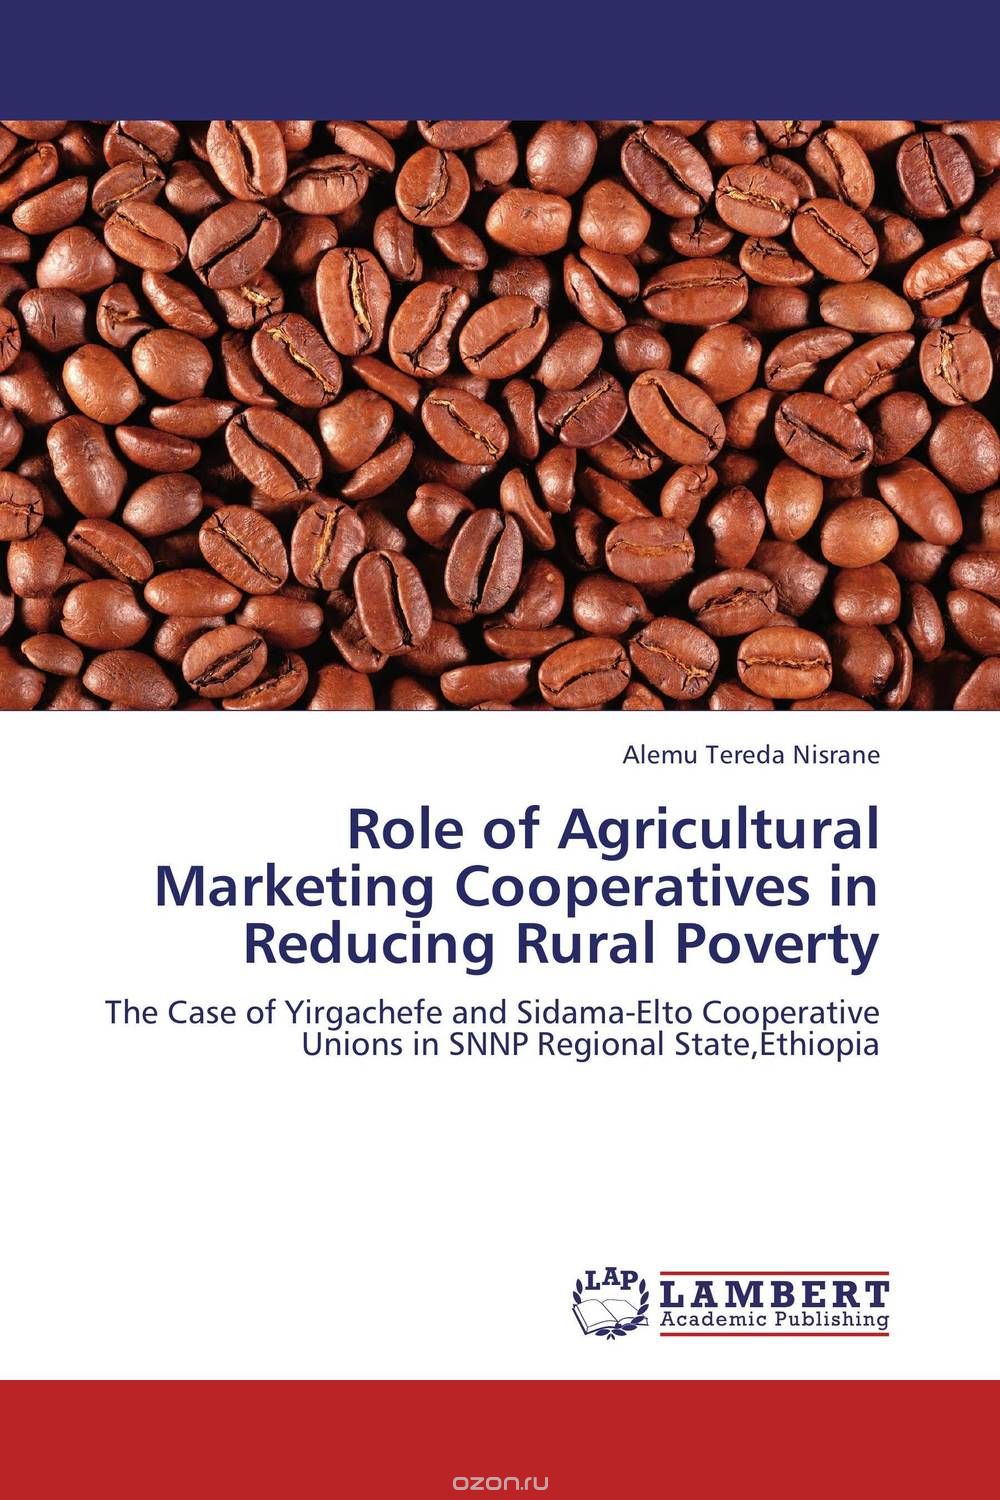 Скачать книгу "Role of Agricultural Marketing Cooperatives in Reducing Rural Poverty"